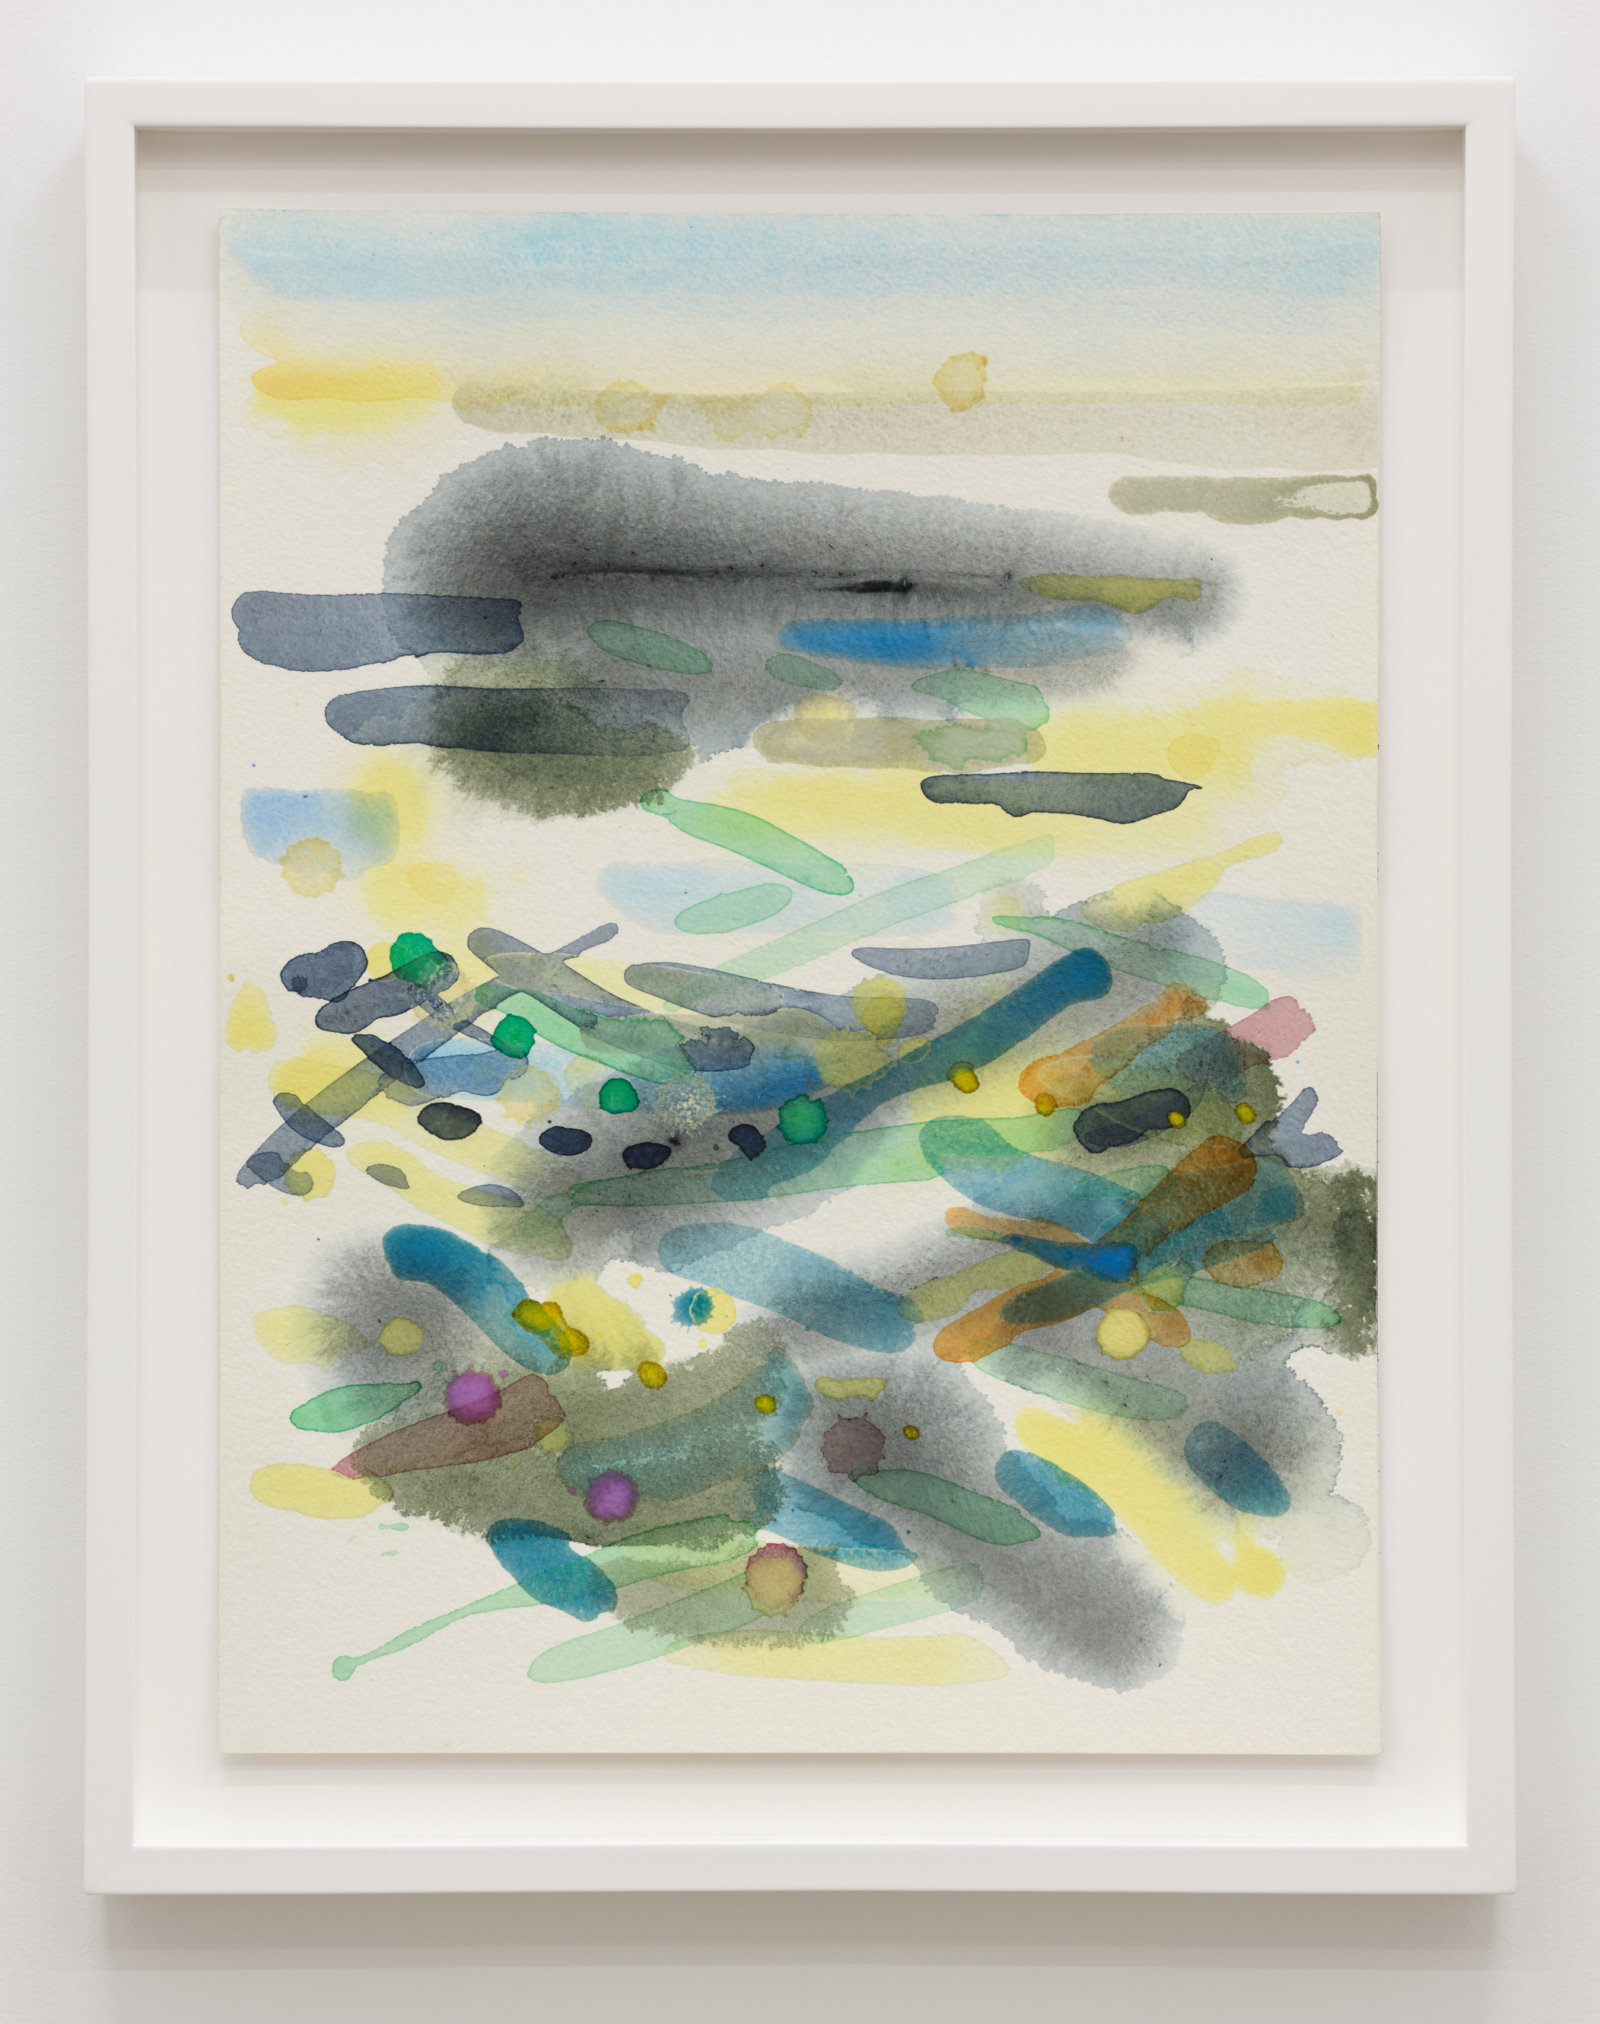 Christina Mackie, from the deck, 2021, watercolour on paper, 16 x 12 in. (41 x 31 cm)